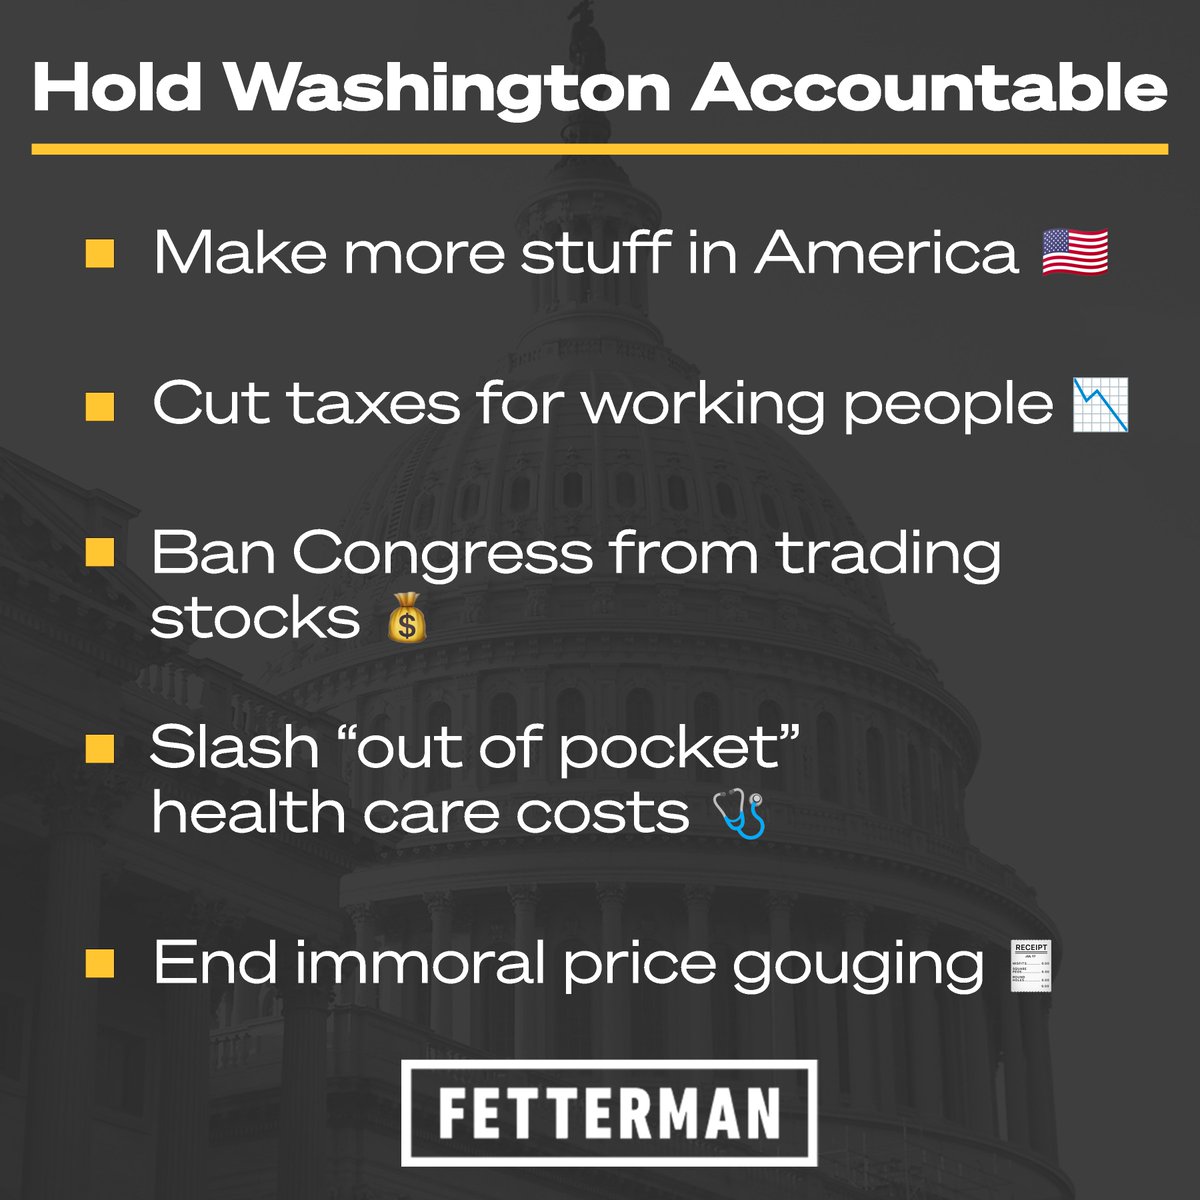 Let's get sh*t done for working people + fix Washington's mess My plan for when you send me to D.C. 👇